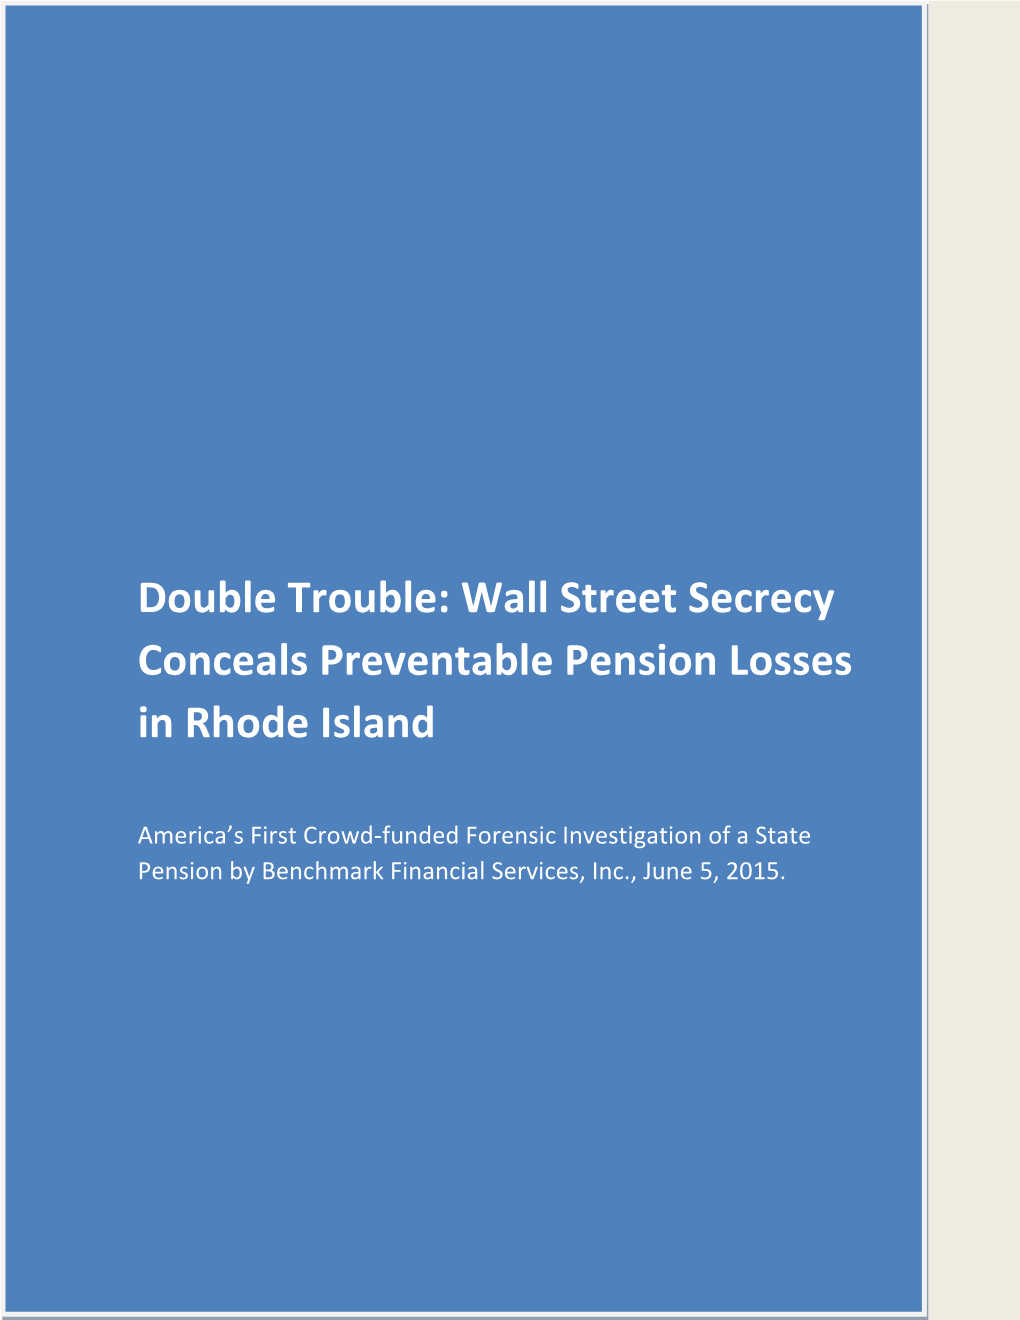 Double Trouble: Wall Street Secrecy Conceals Preventable Pension Losses in Rhode Island